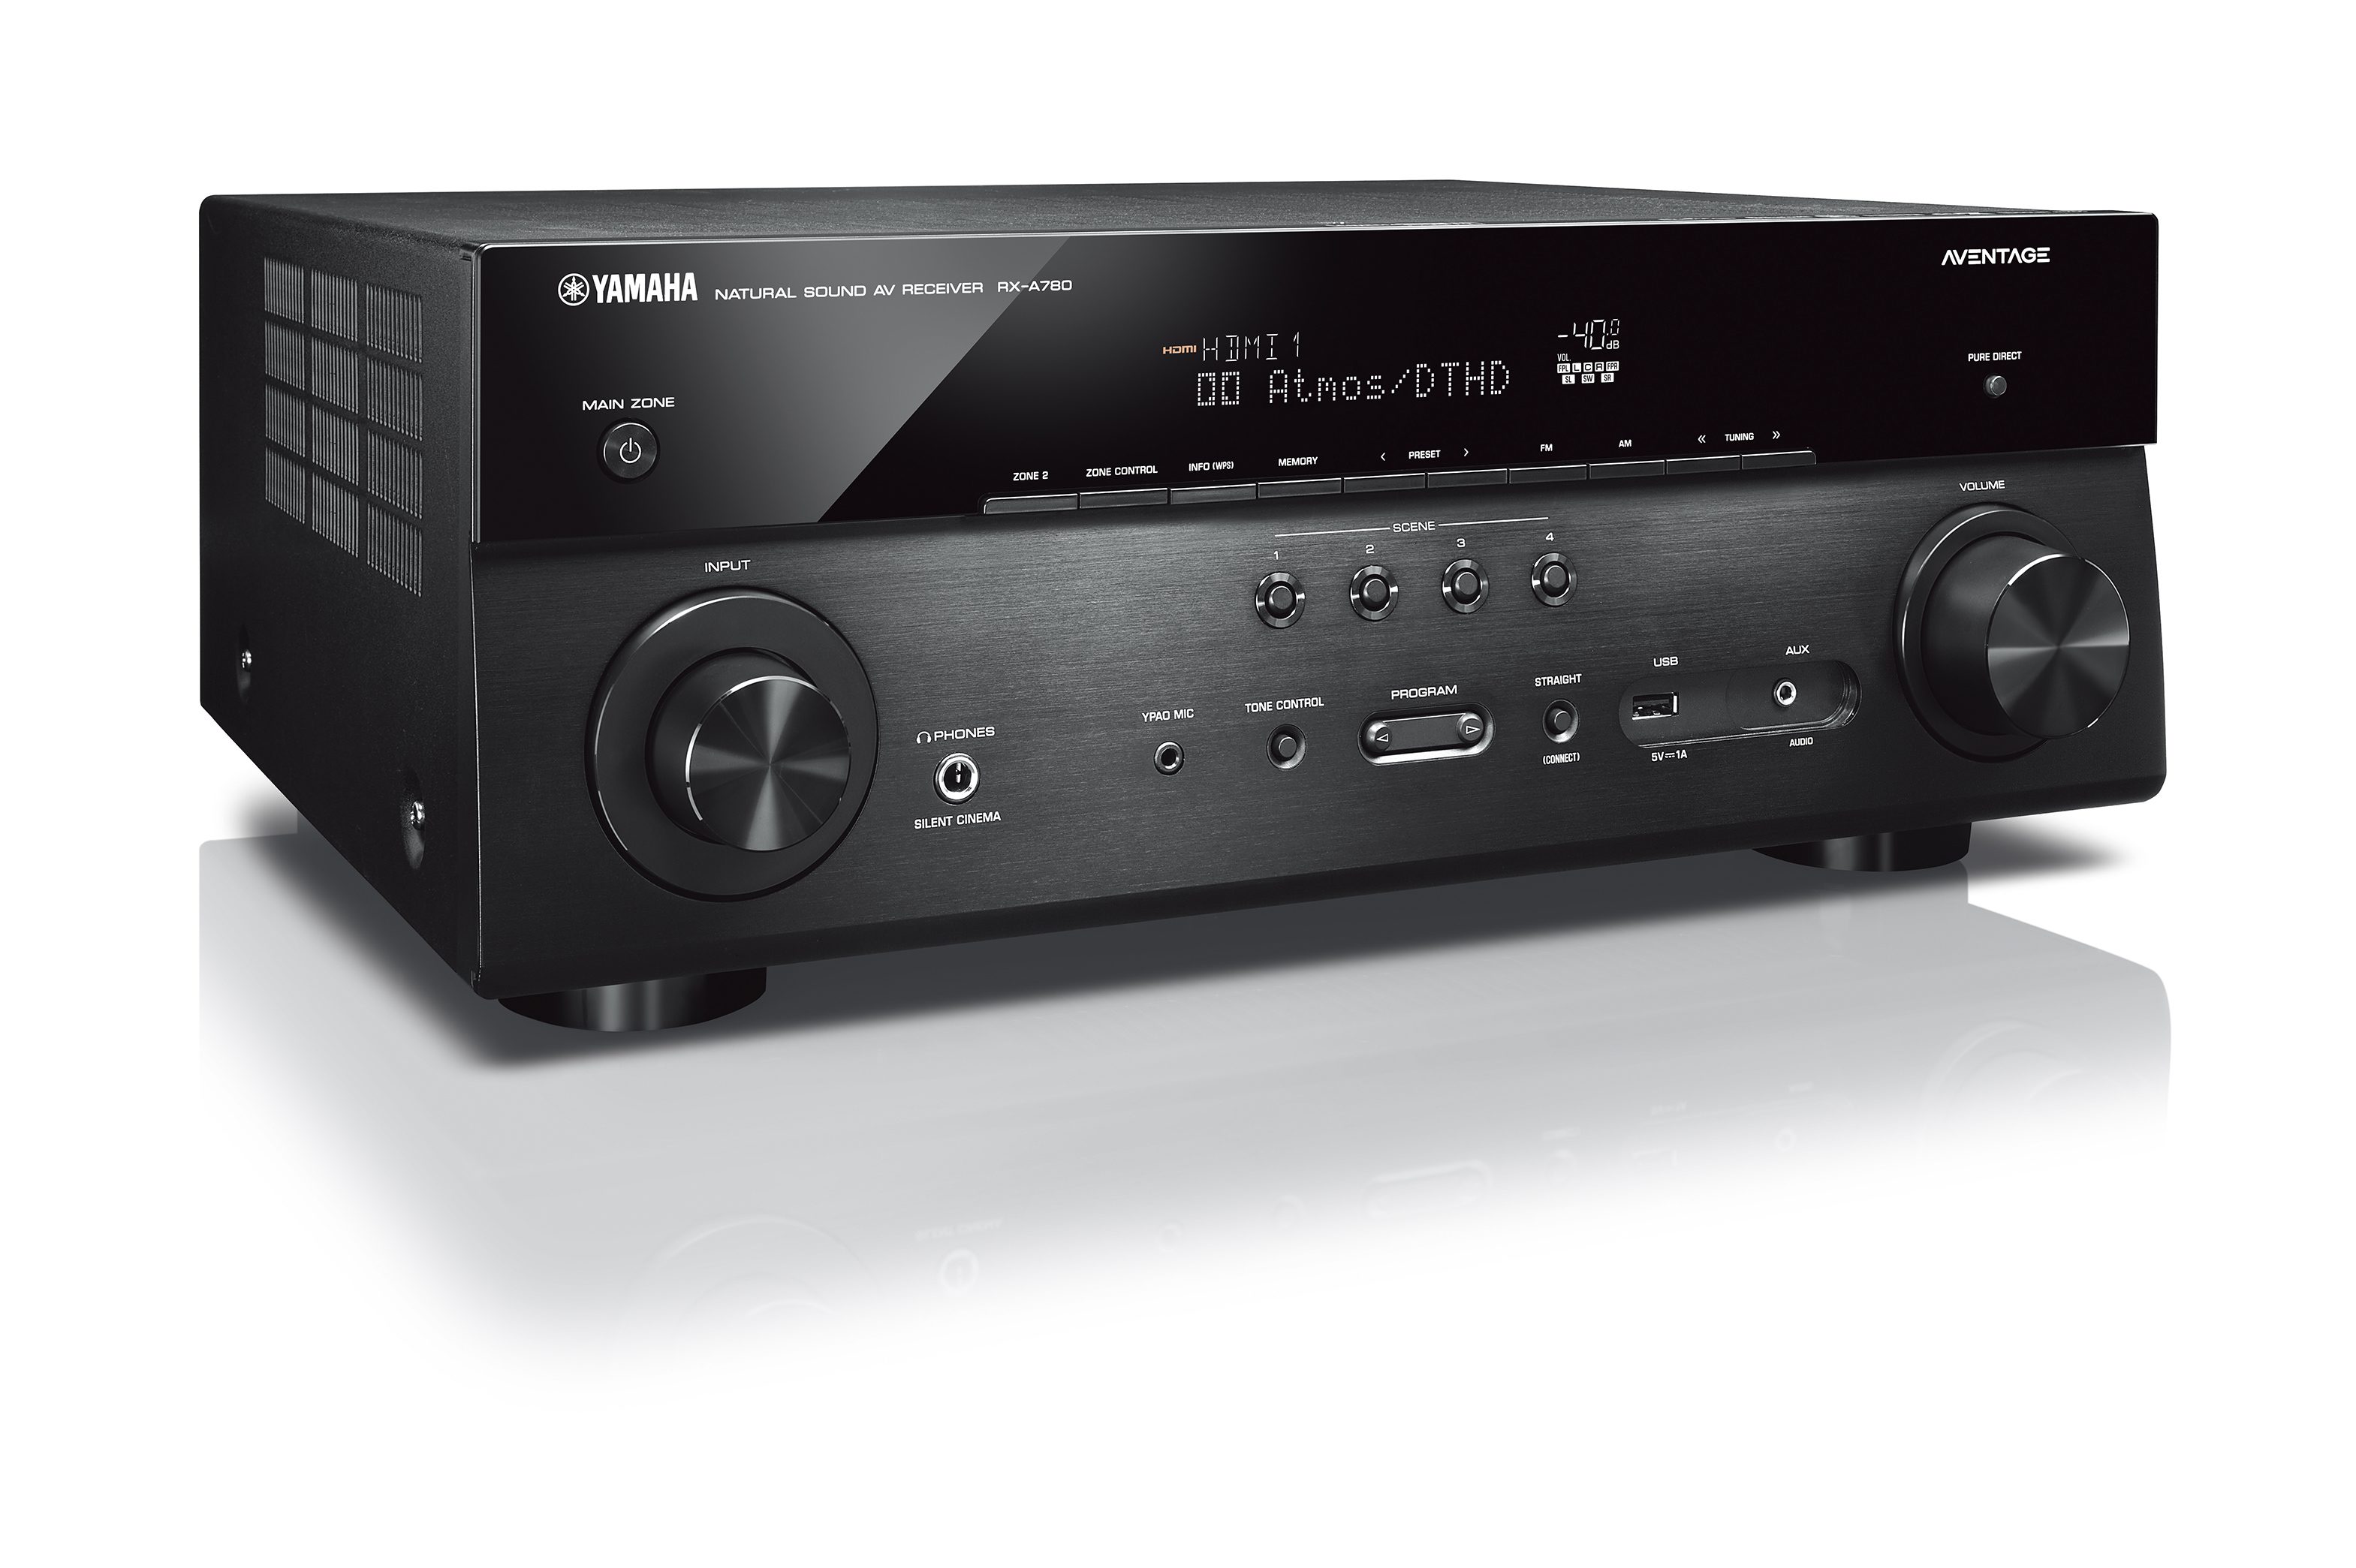 RX-A780 - Overview - AV Receivers - Audio & Visual - Products